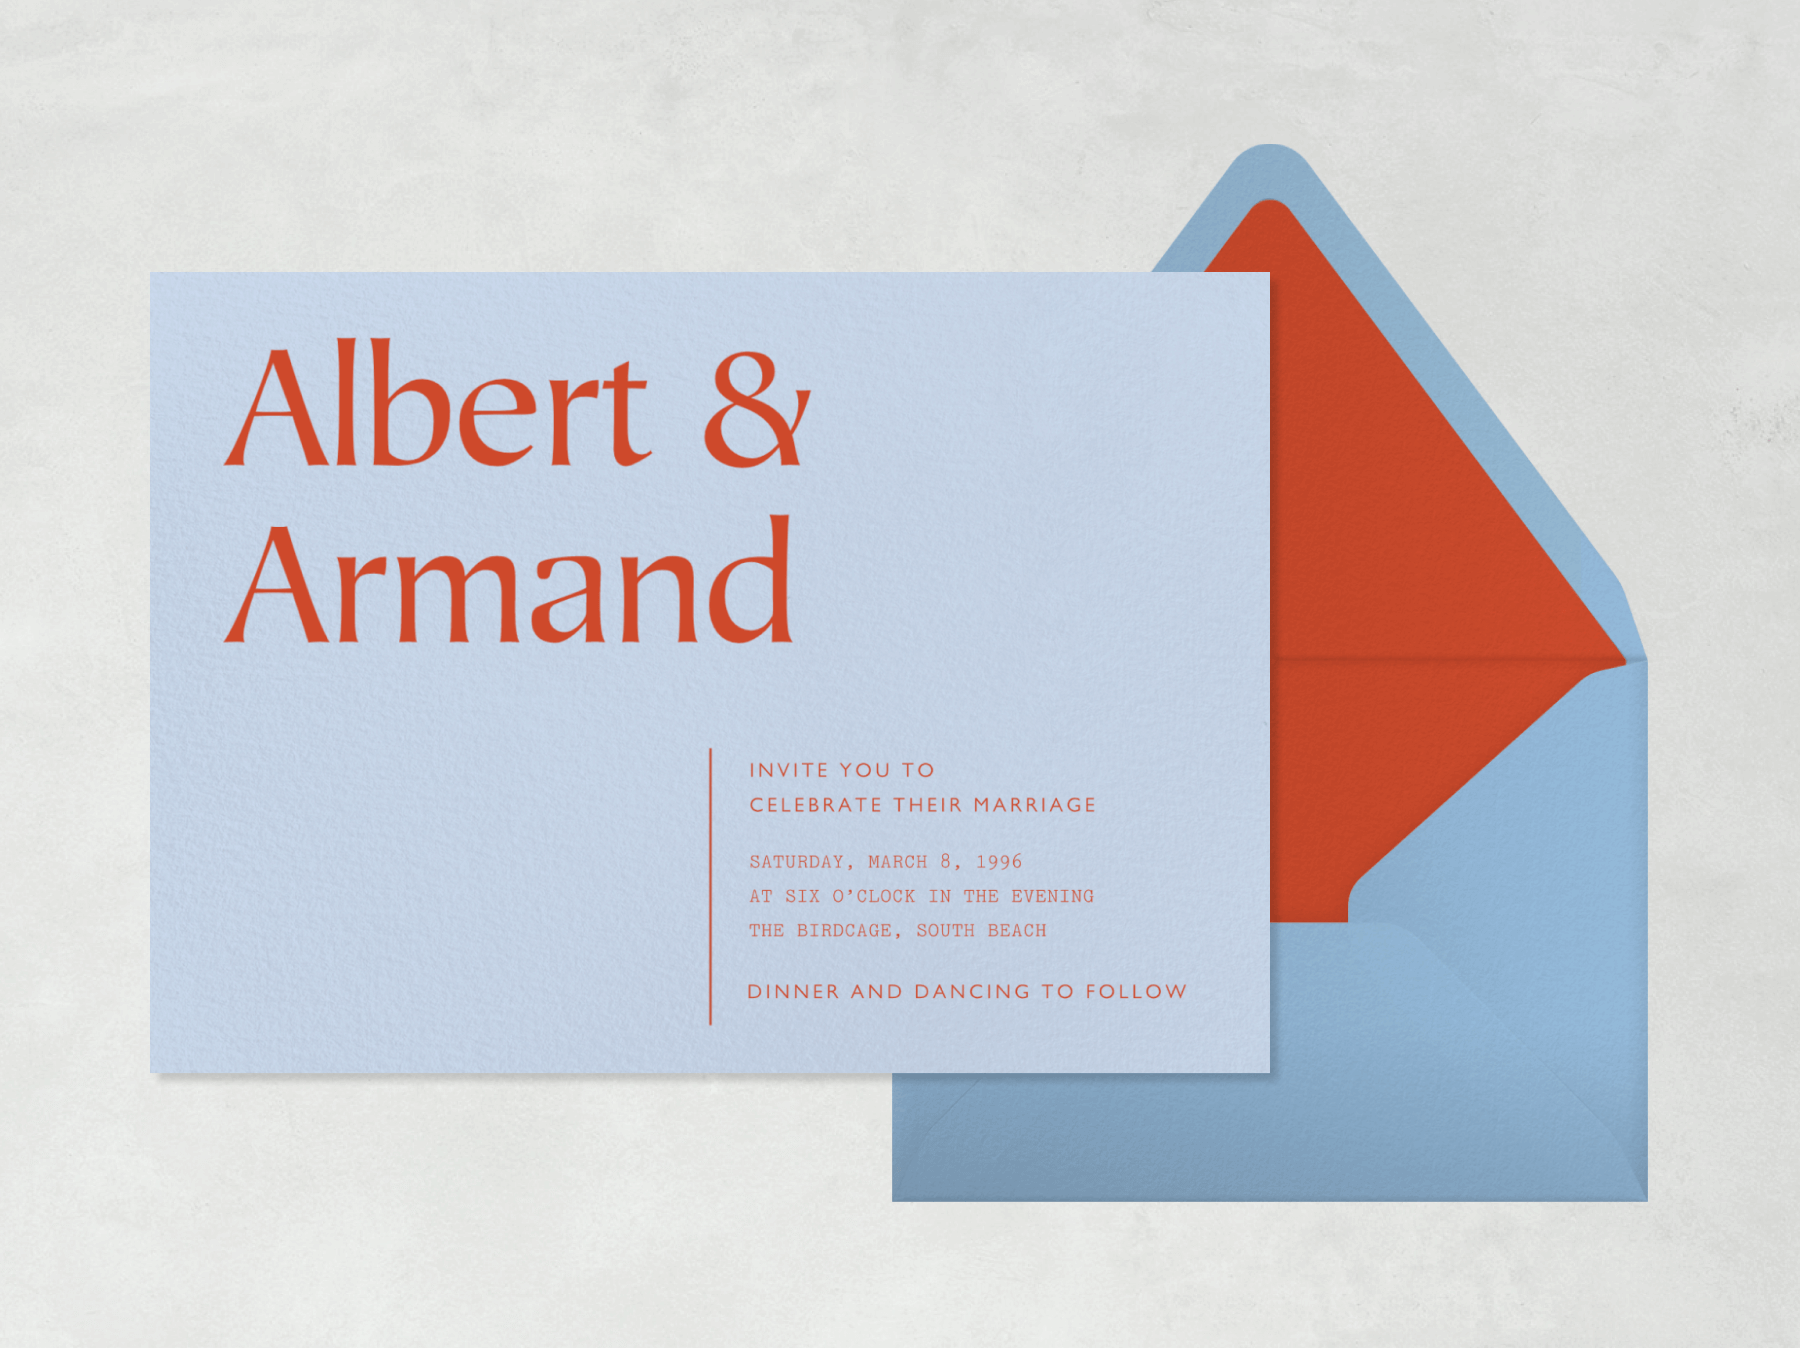 A powder blue wedding invitation with two first names in large red lettering beside a blue envelope with red liner.